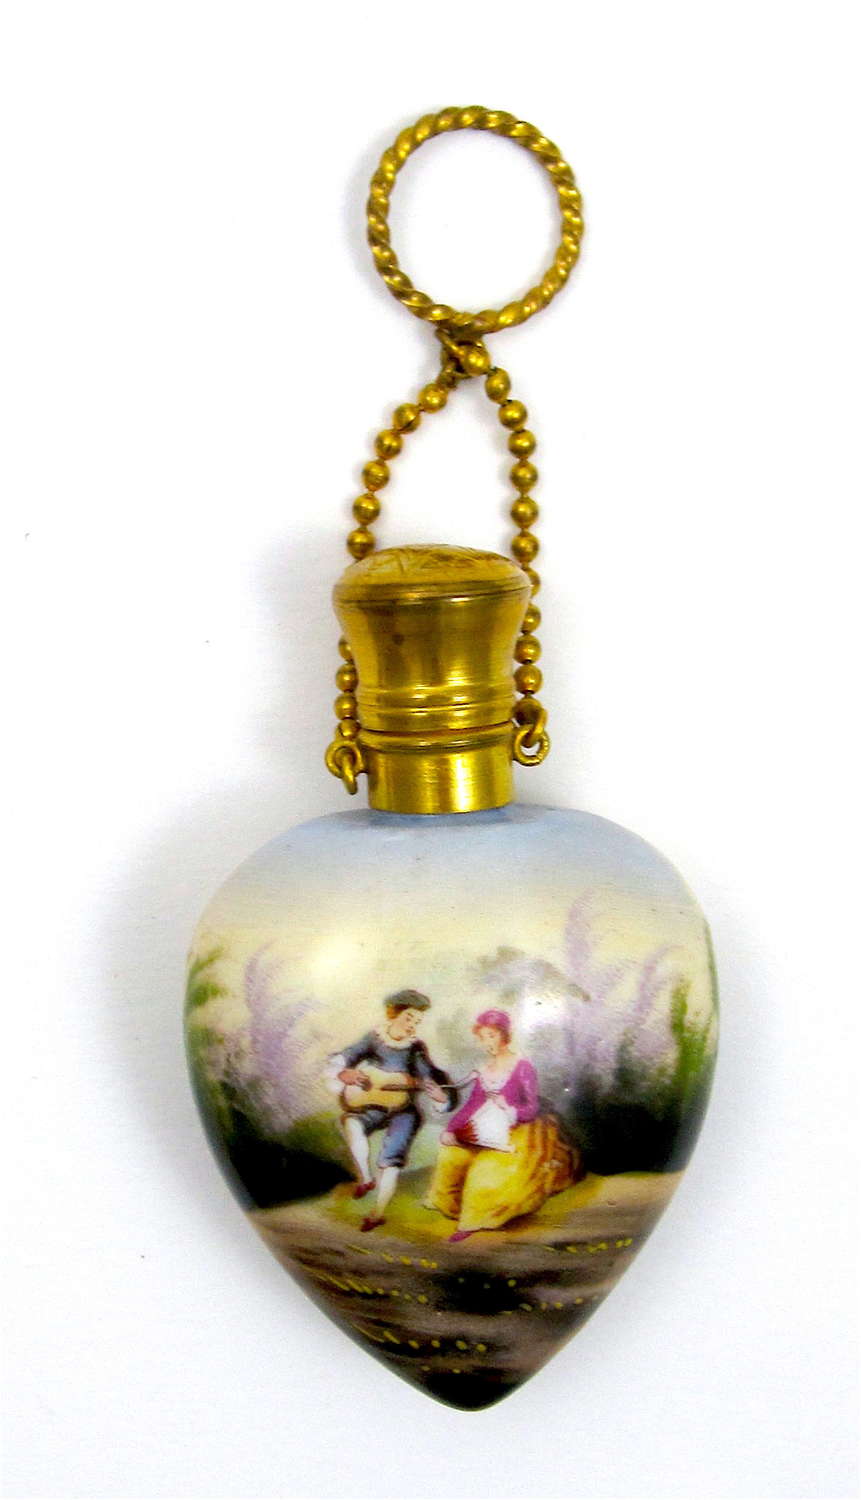 A High Quality Antique Heart Shaped French Porcelain Perfume